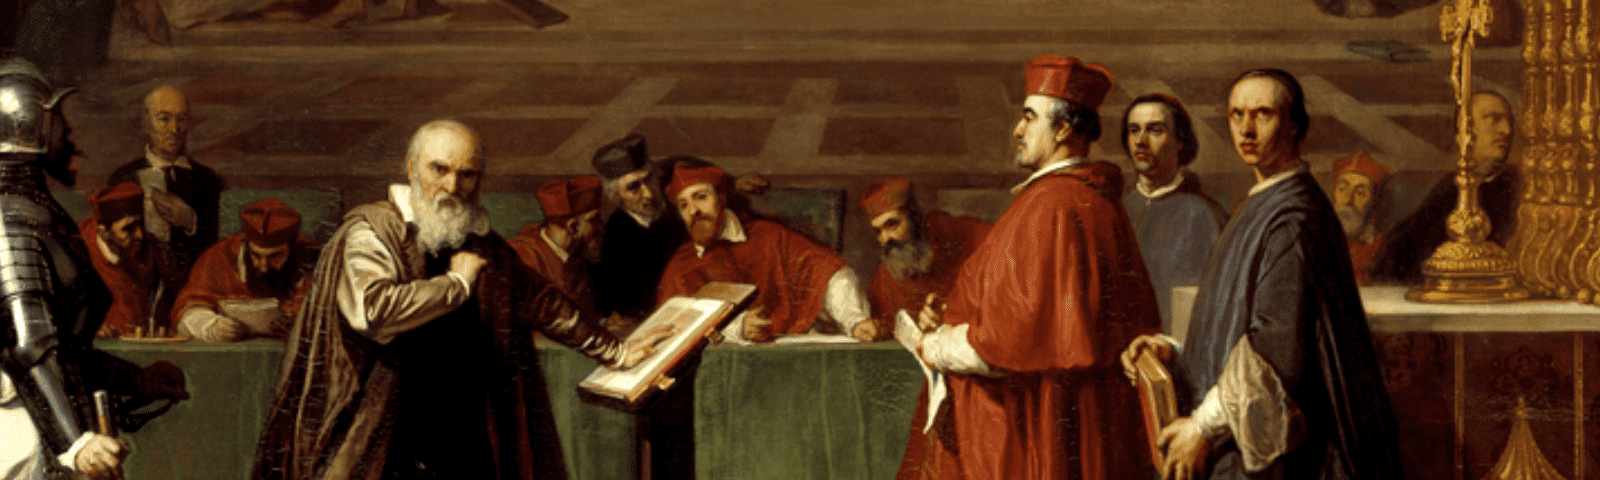 The trial of Galileo Galilei is one of the most well-known episodes of the Inquisition’s work.